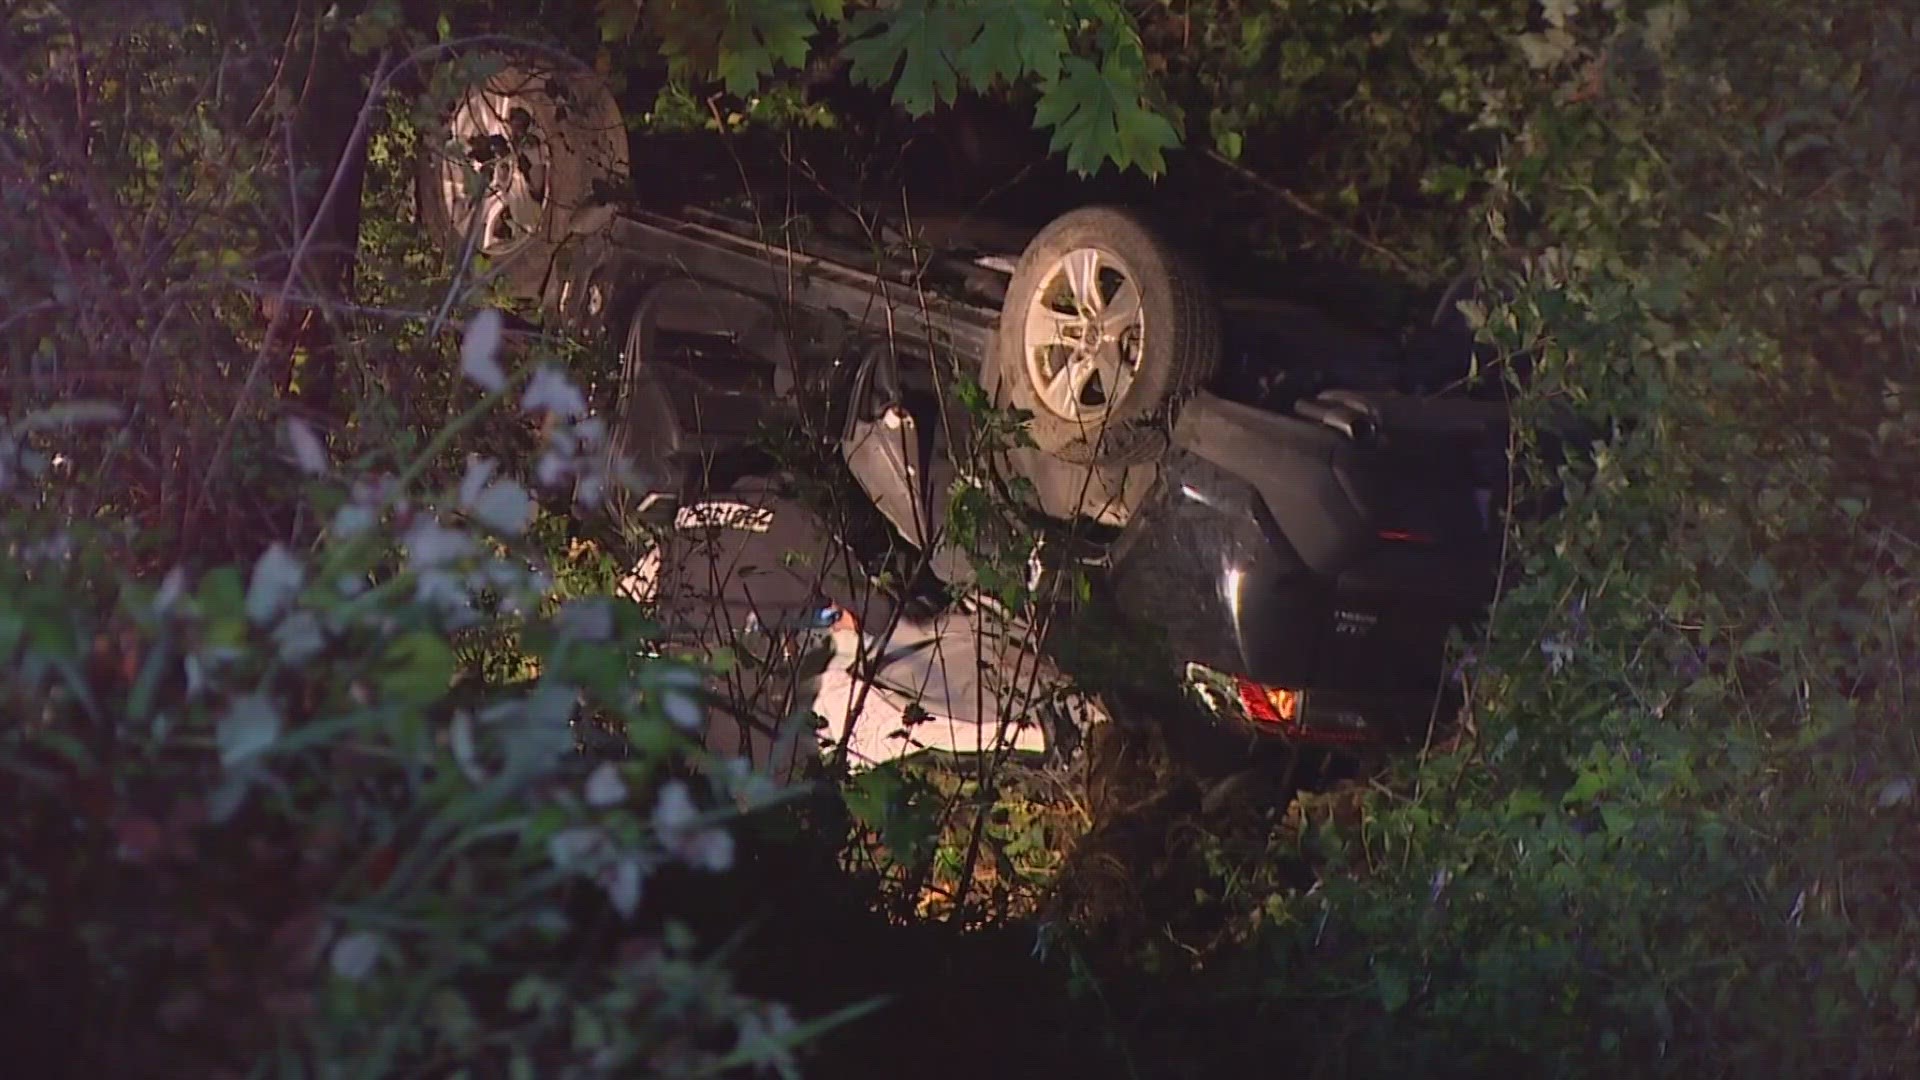 Two people were injured after their car flipped over into a ravine along 61st Ave. NE in Kenmore Wednesday morning.